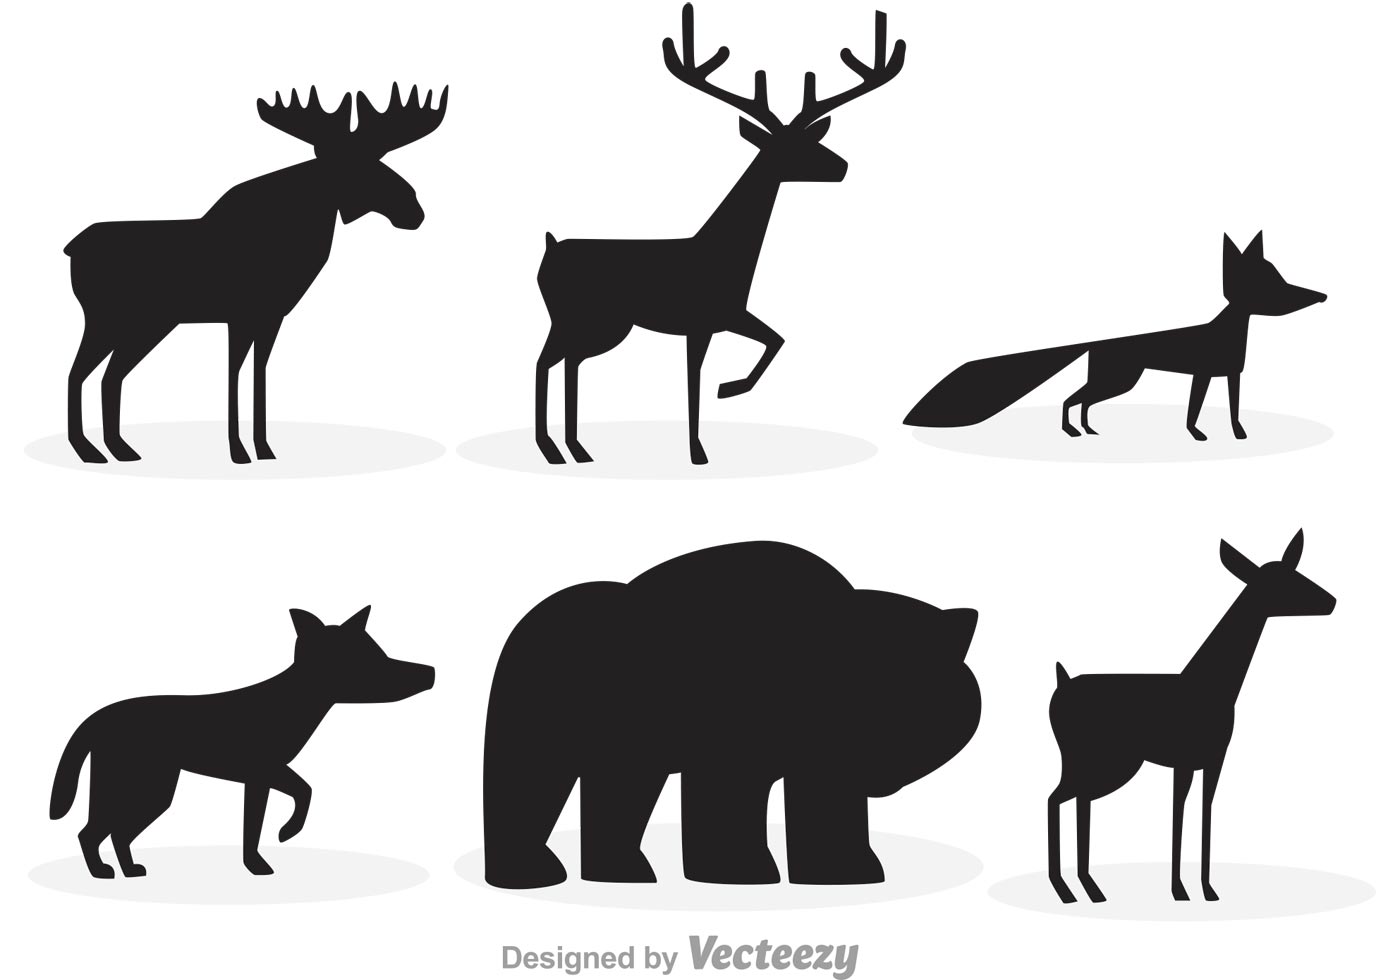 Download Forest Animal Silhouettes 92563 - Download Free Vectors, Clipart Graphics & Vector Art